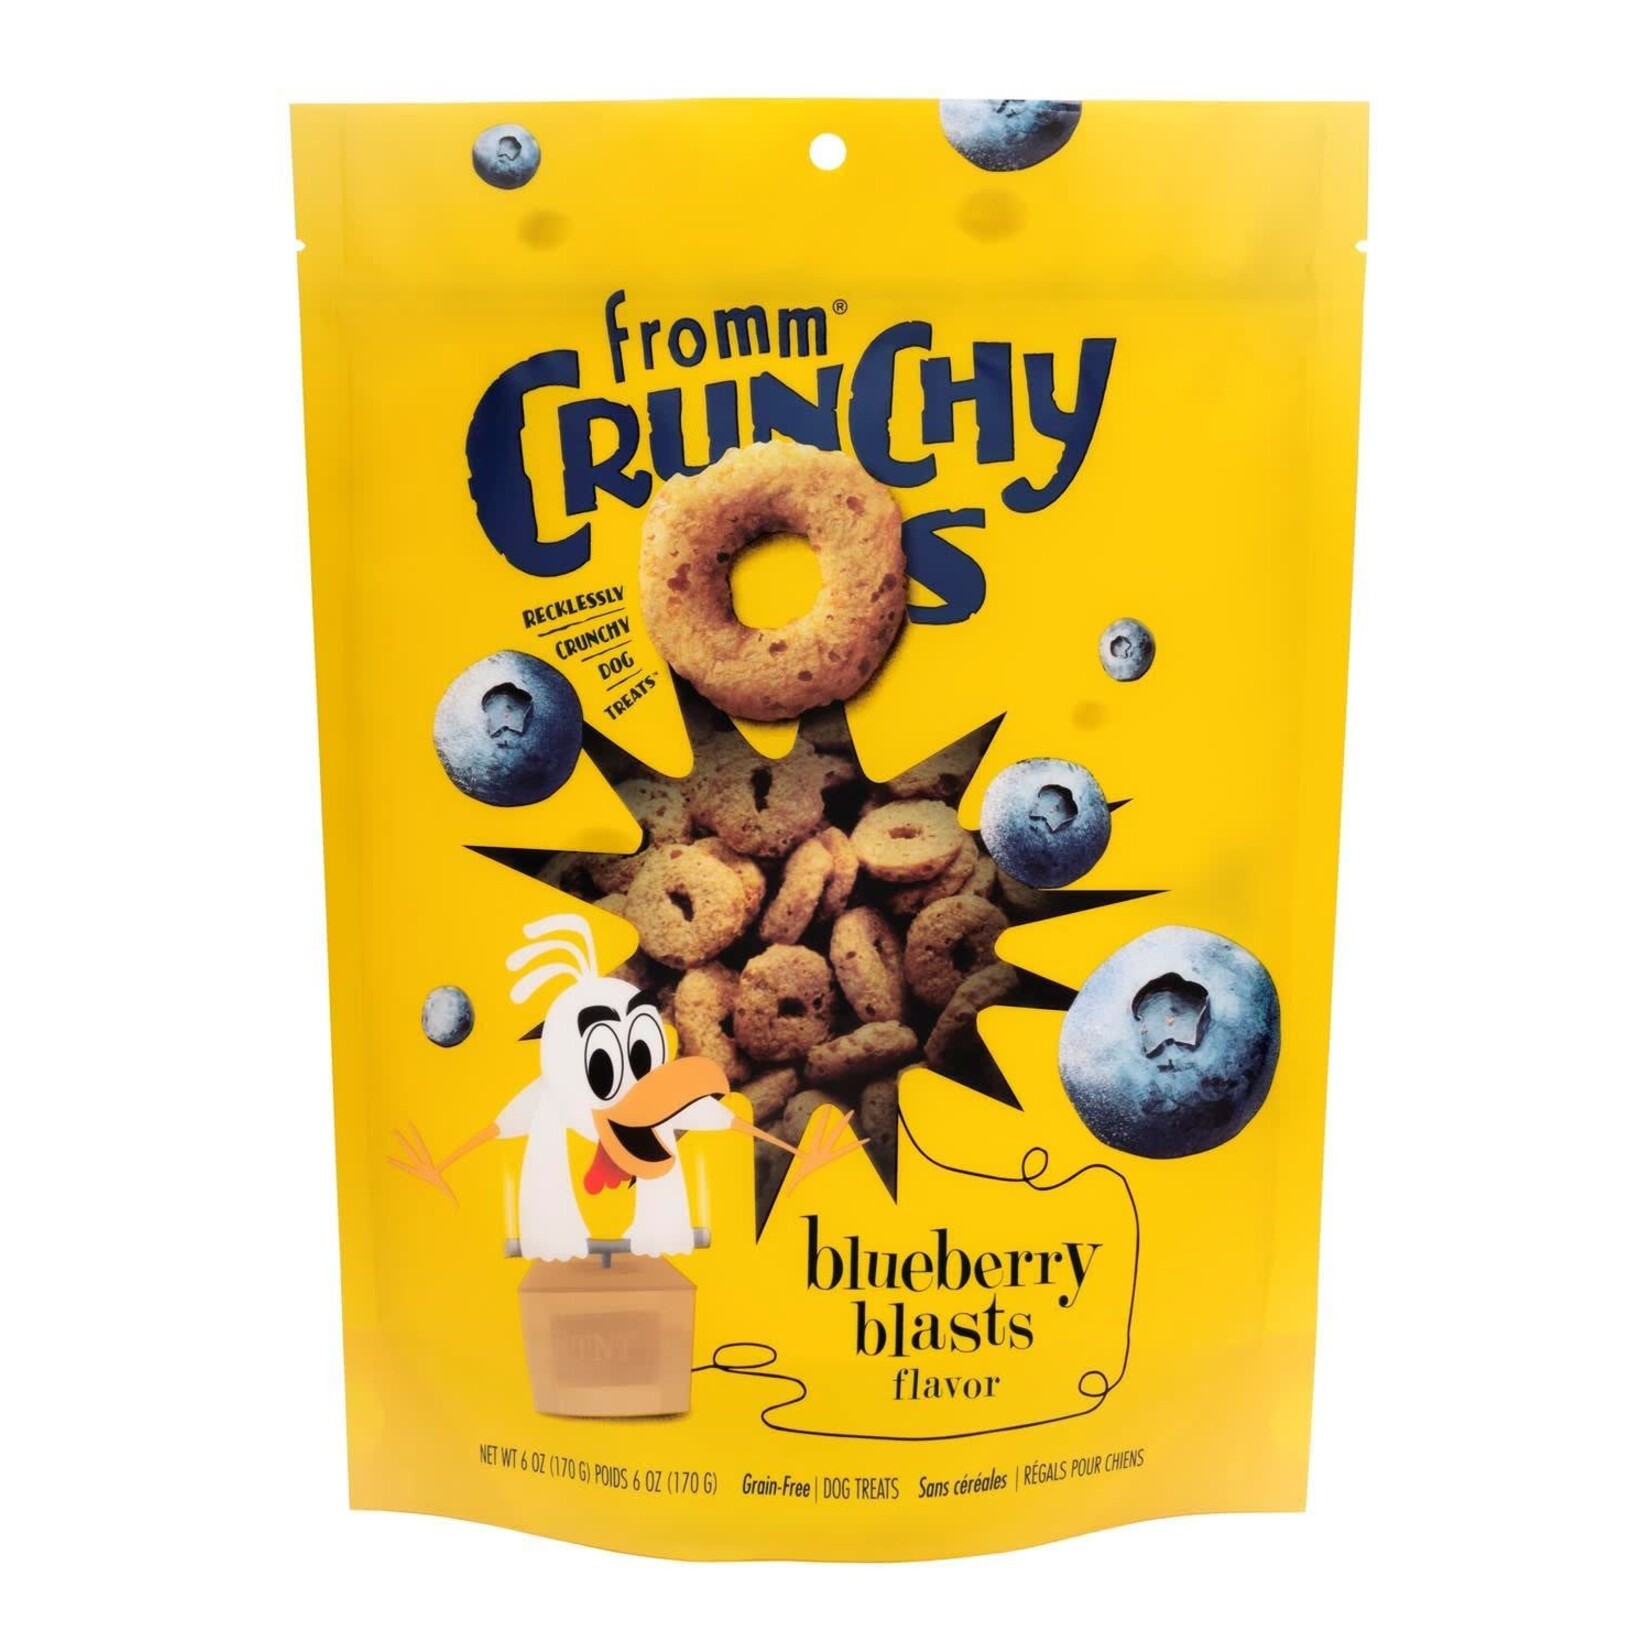 Fromm Crunchy Os Blueberry Blasts Flavor Dog Treats